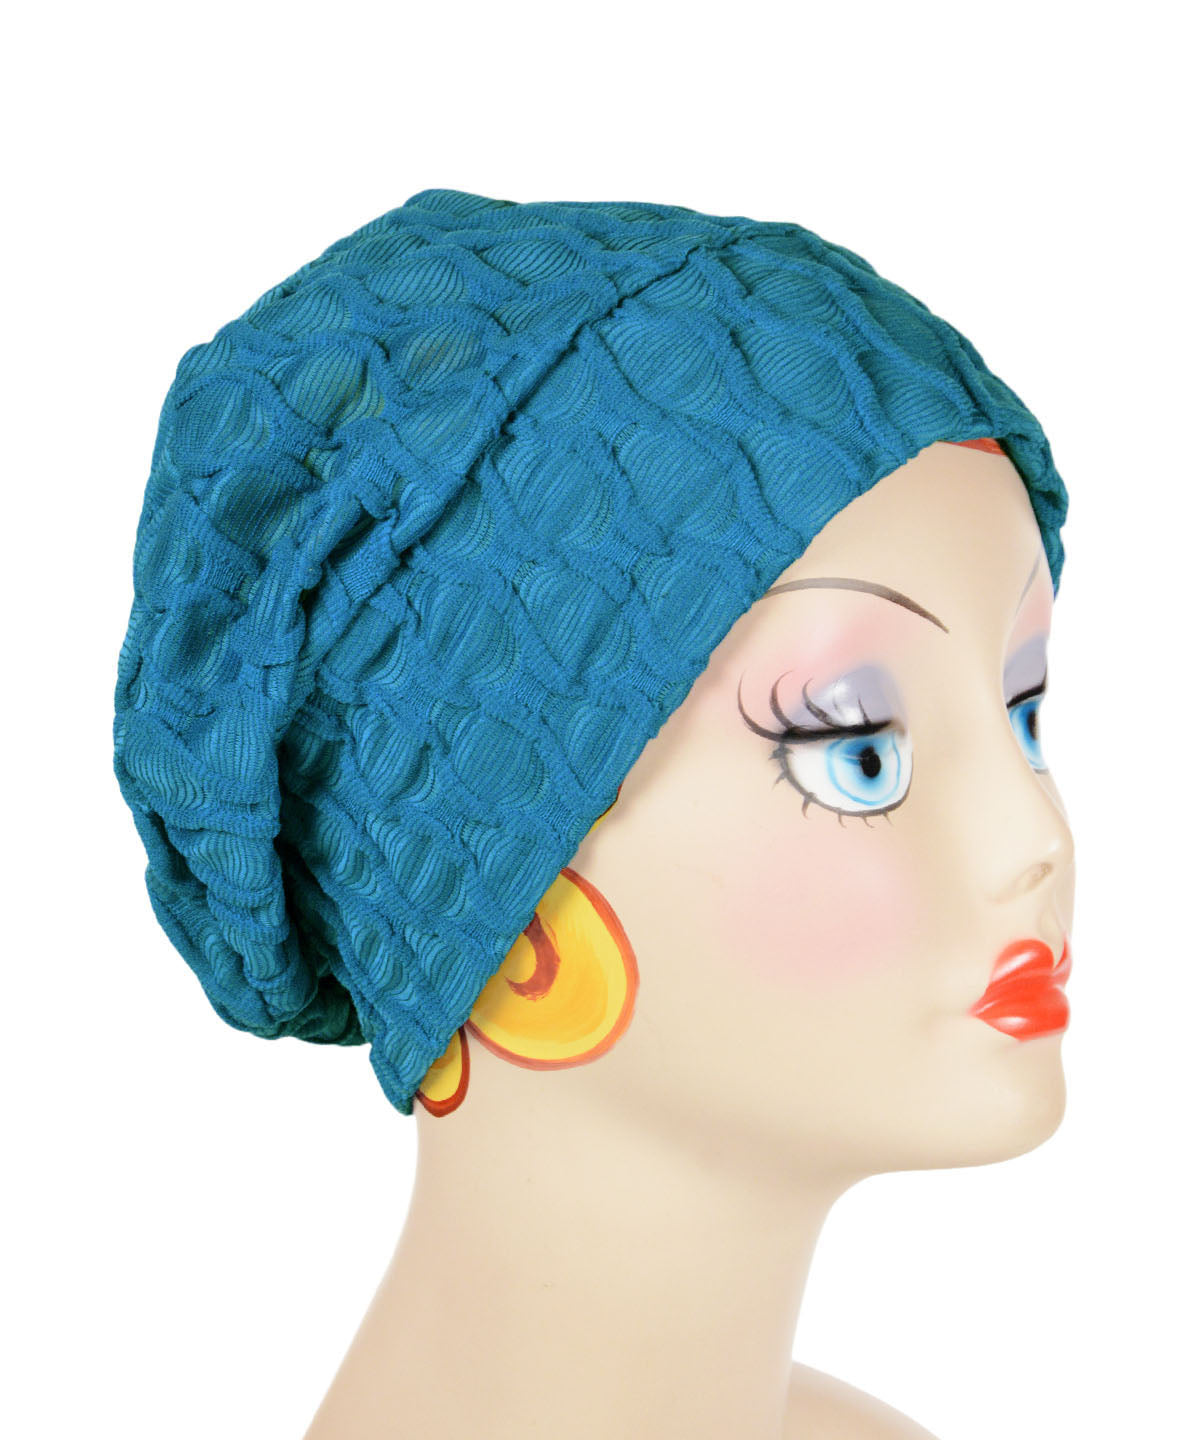 Rowdie Hat shown in Cerulean Blue on product model. LYC by Pandemonium is handmade in Seattle, WA, USA.